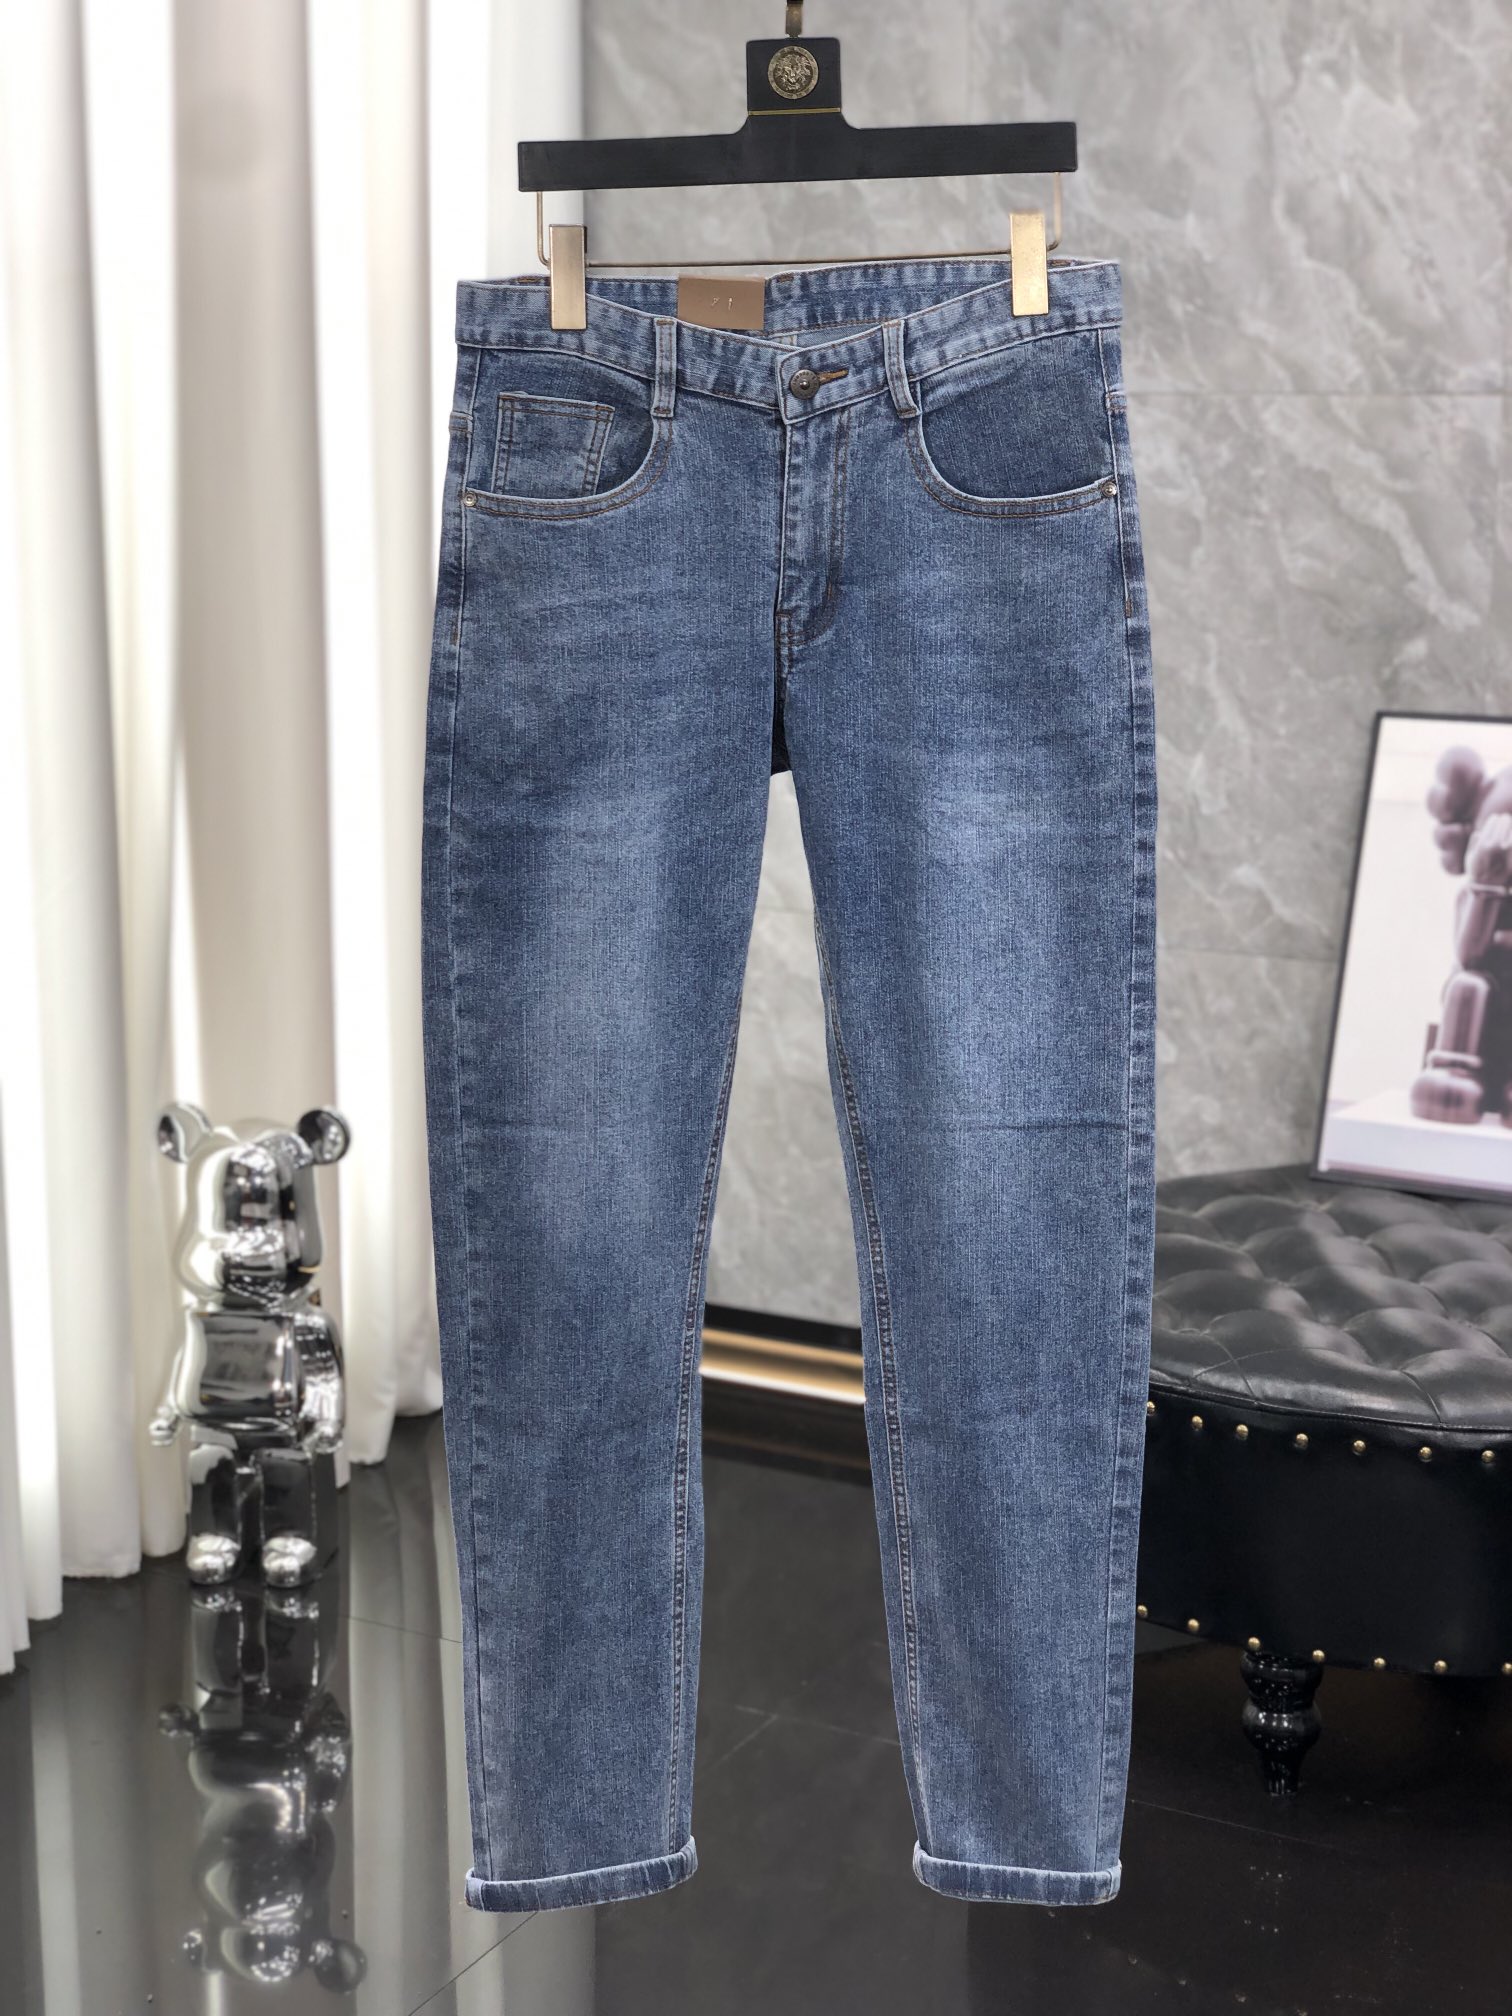 Burberry Clothing Jeans Top Quality Replica
 Men Denim Genuine Leather Fall Collection Fashion